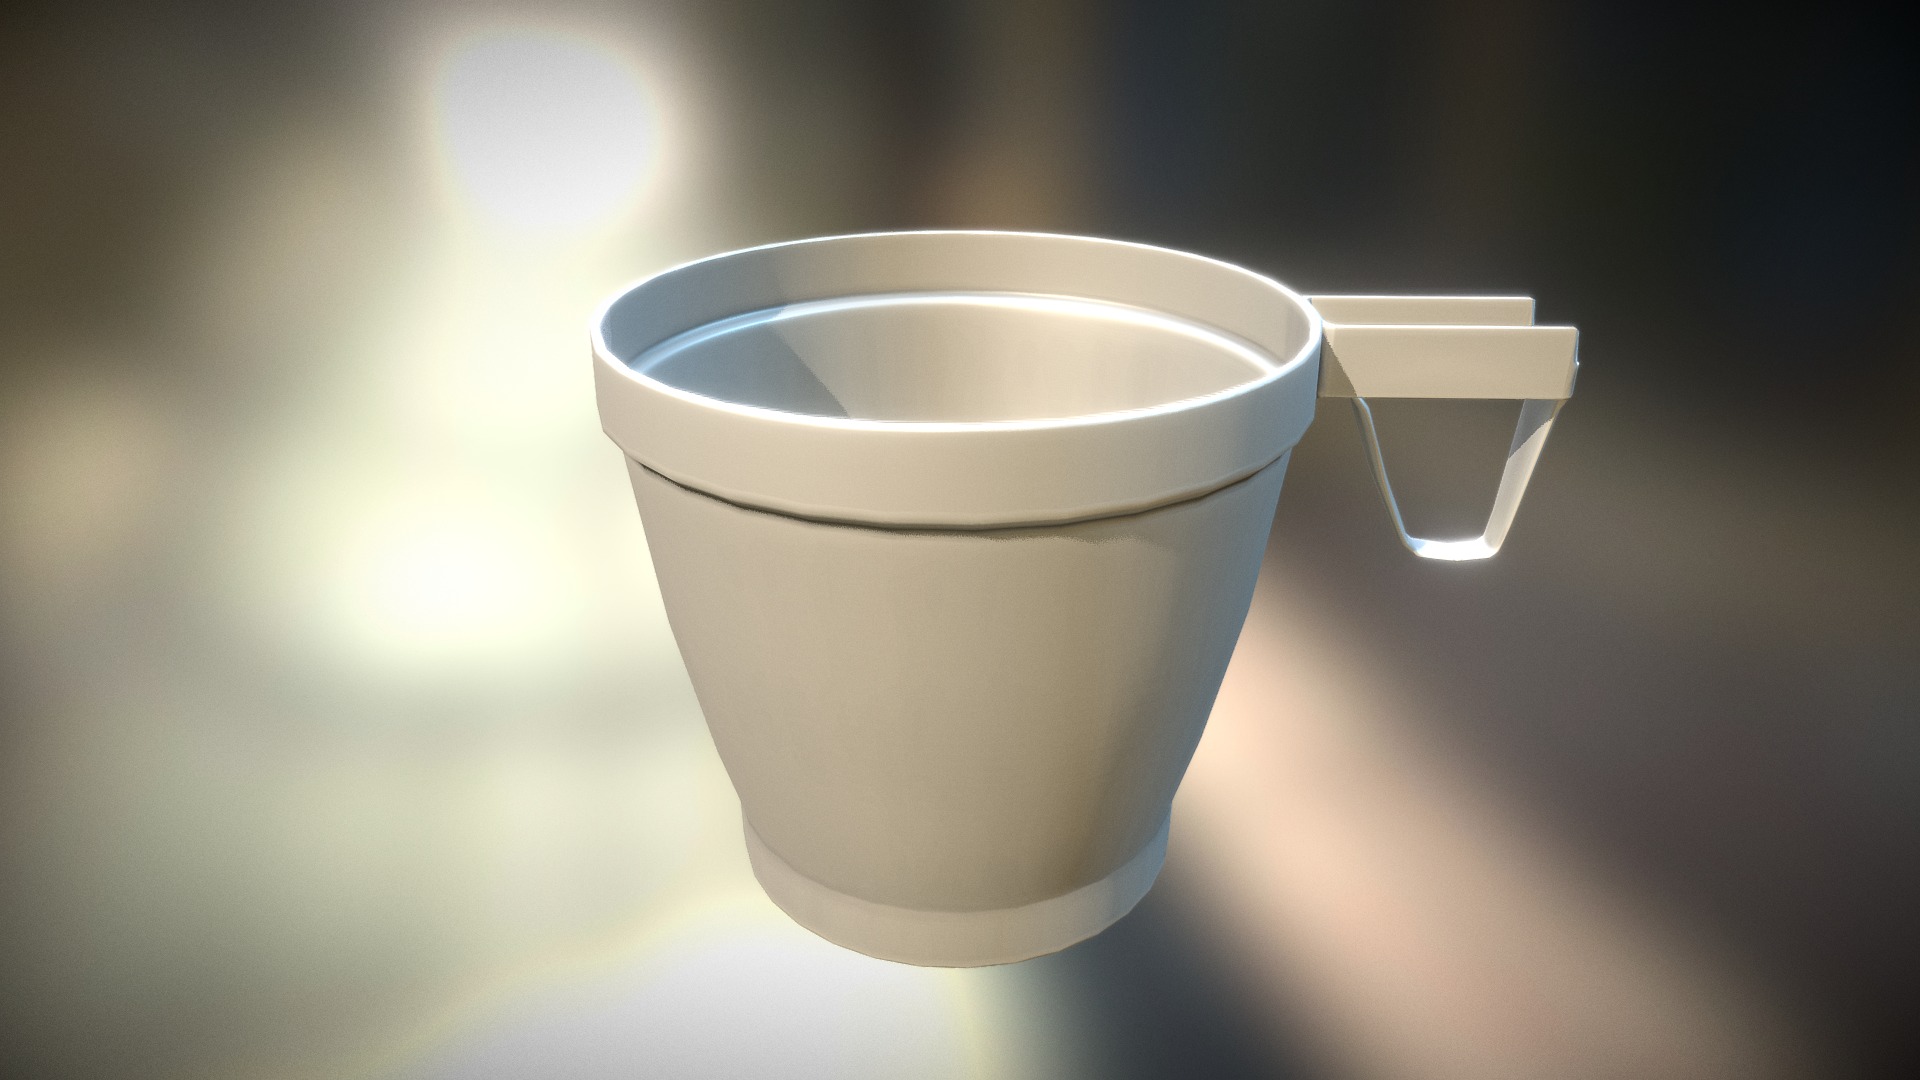 3D model Plastic Cup 2 Low-Poly Version - This is a 3D model of the Plastic Cup 2 Low-Poly Version. The 3D model is about a white cup with a handle.